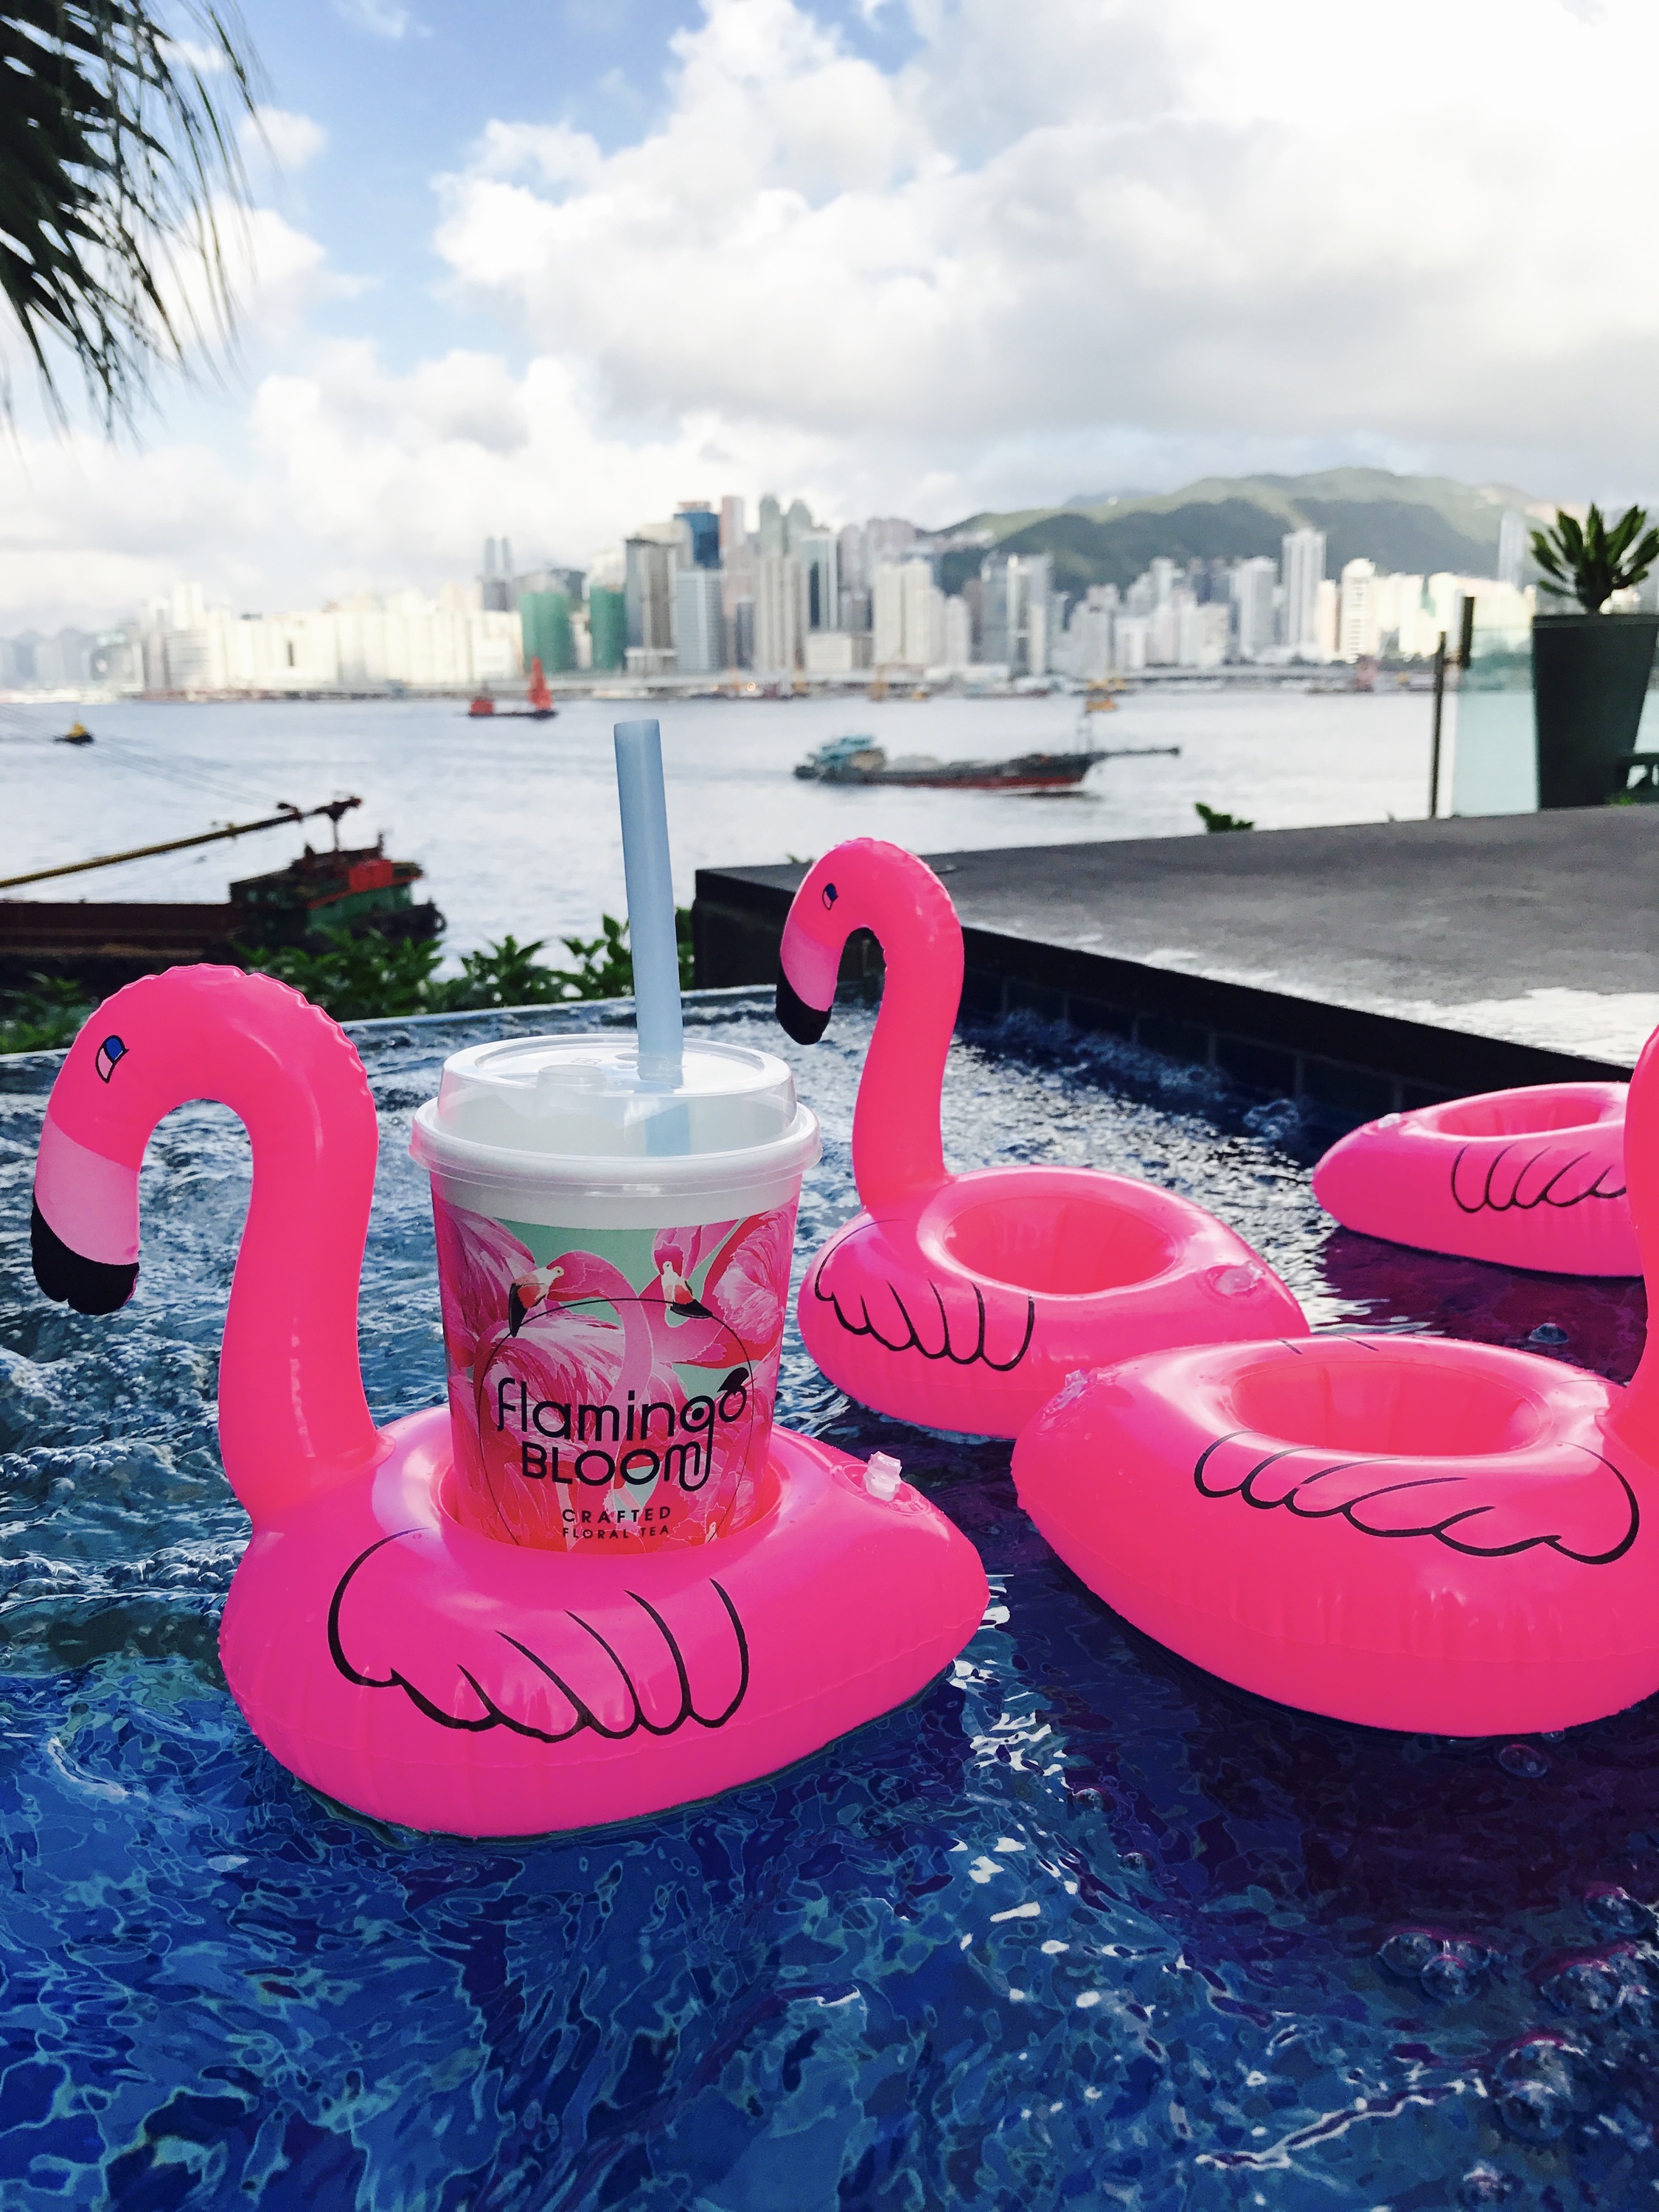 A drink from Flamingo Bloom floats on an inflatable flamingo (credit: Time Out)